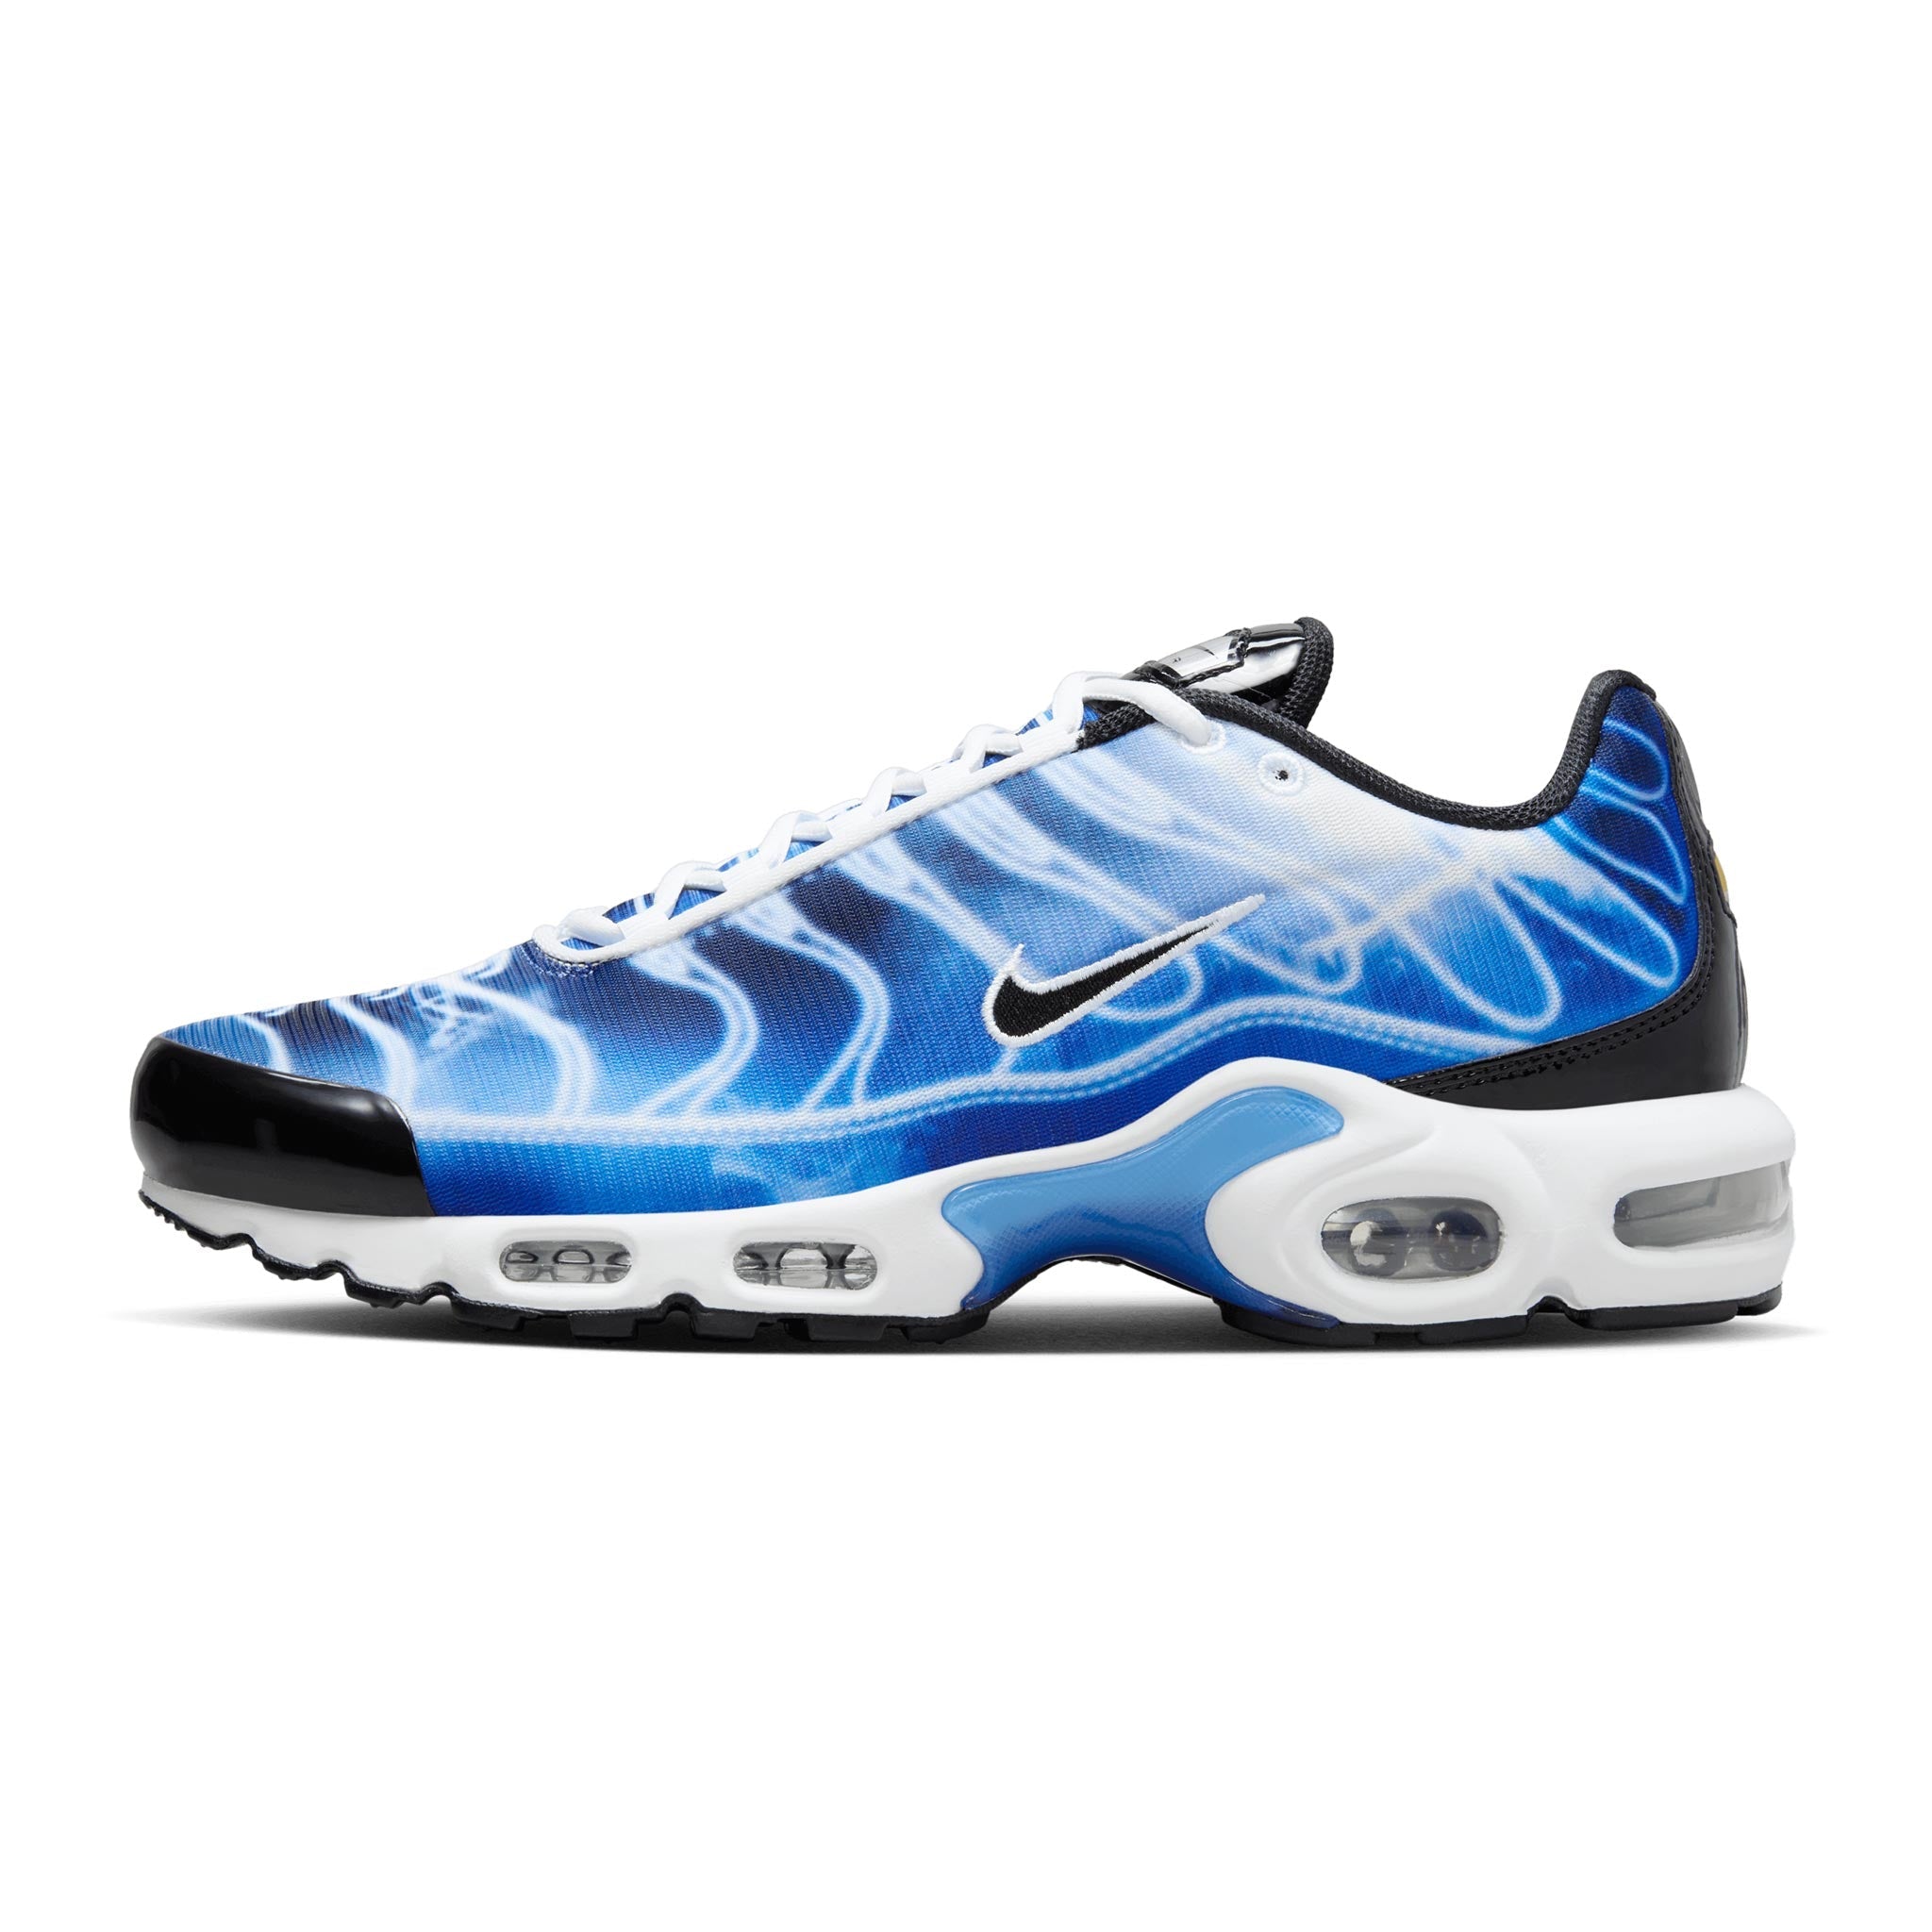 Nike Air Max Plus (TN) 'Light Photography Old Royal/Ice Blue' 